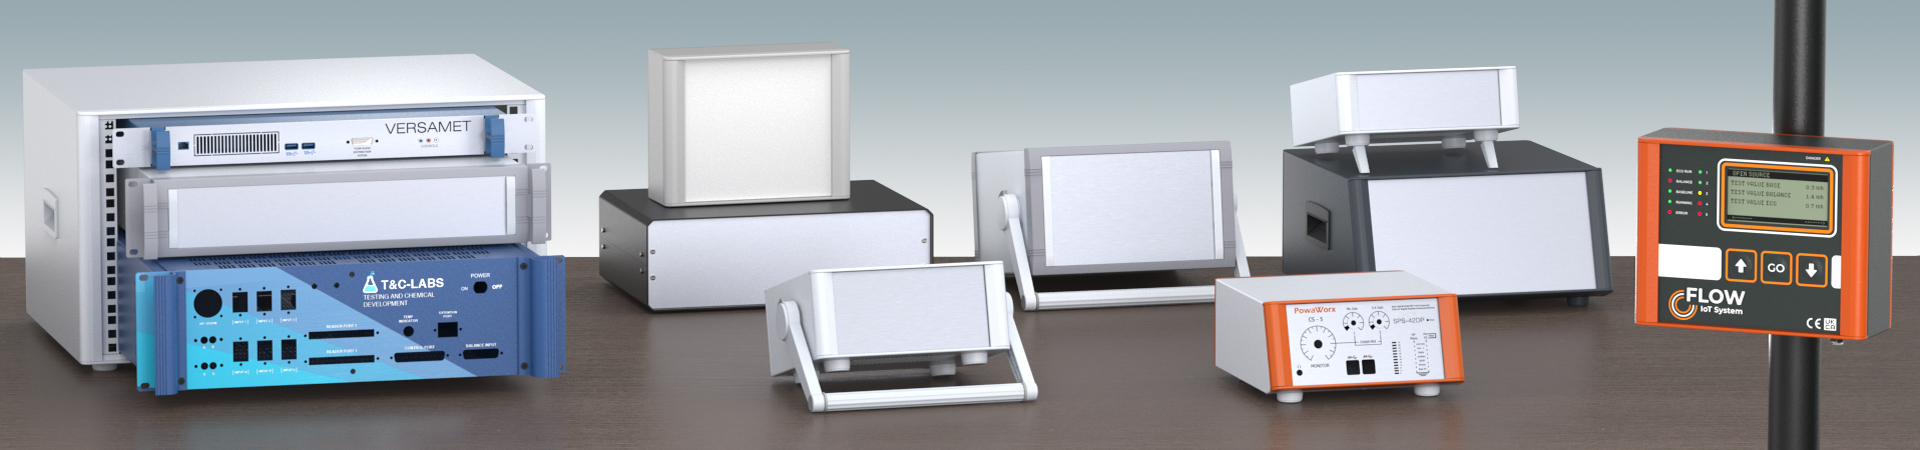 METCASE metal instrument enclosures, 19 inch rack cases and customised enclosures for modern OEM electronics.